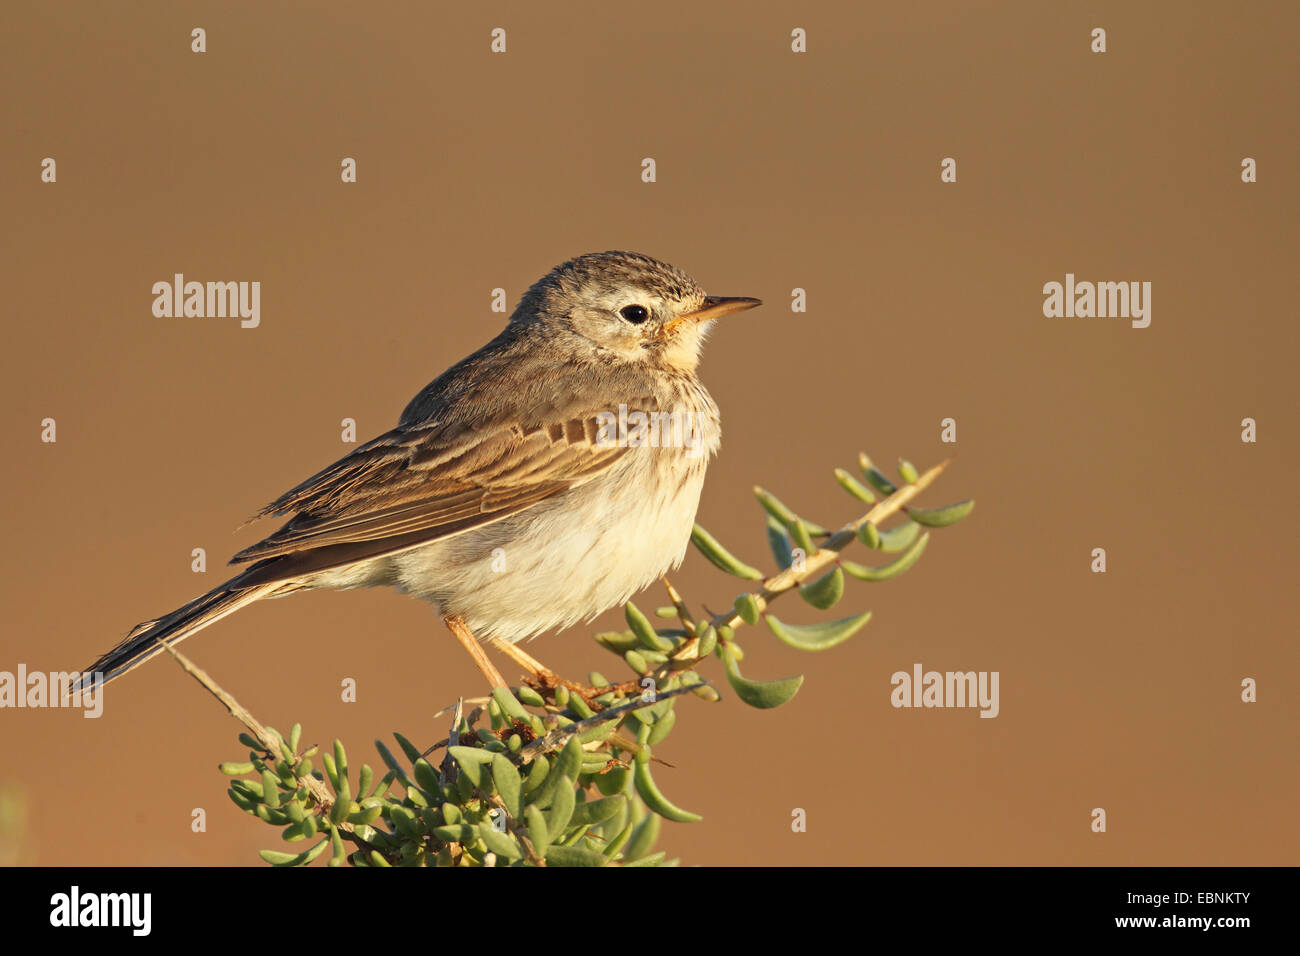 Canarian pitpit (Anthus berthelotii), pipit sitting on a bush, Canary Islands, Fuerteventura Stock Photo